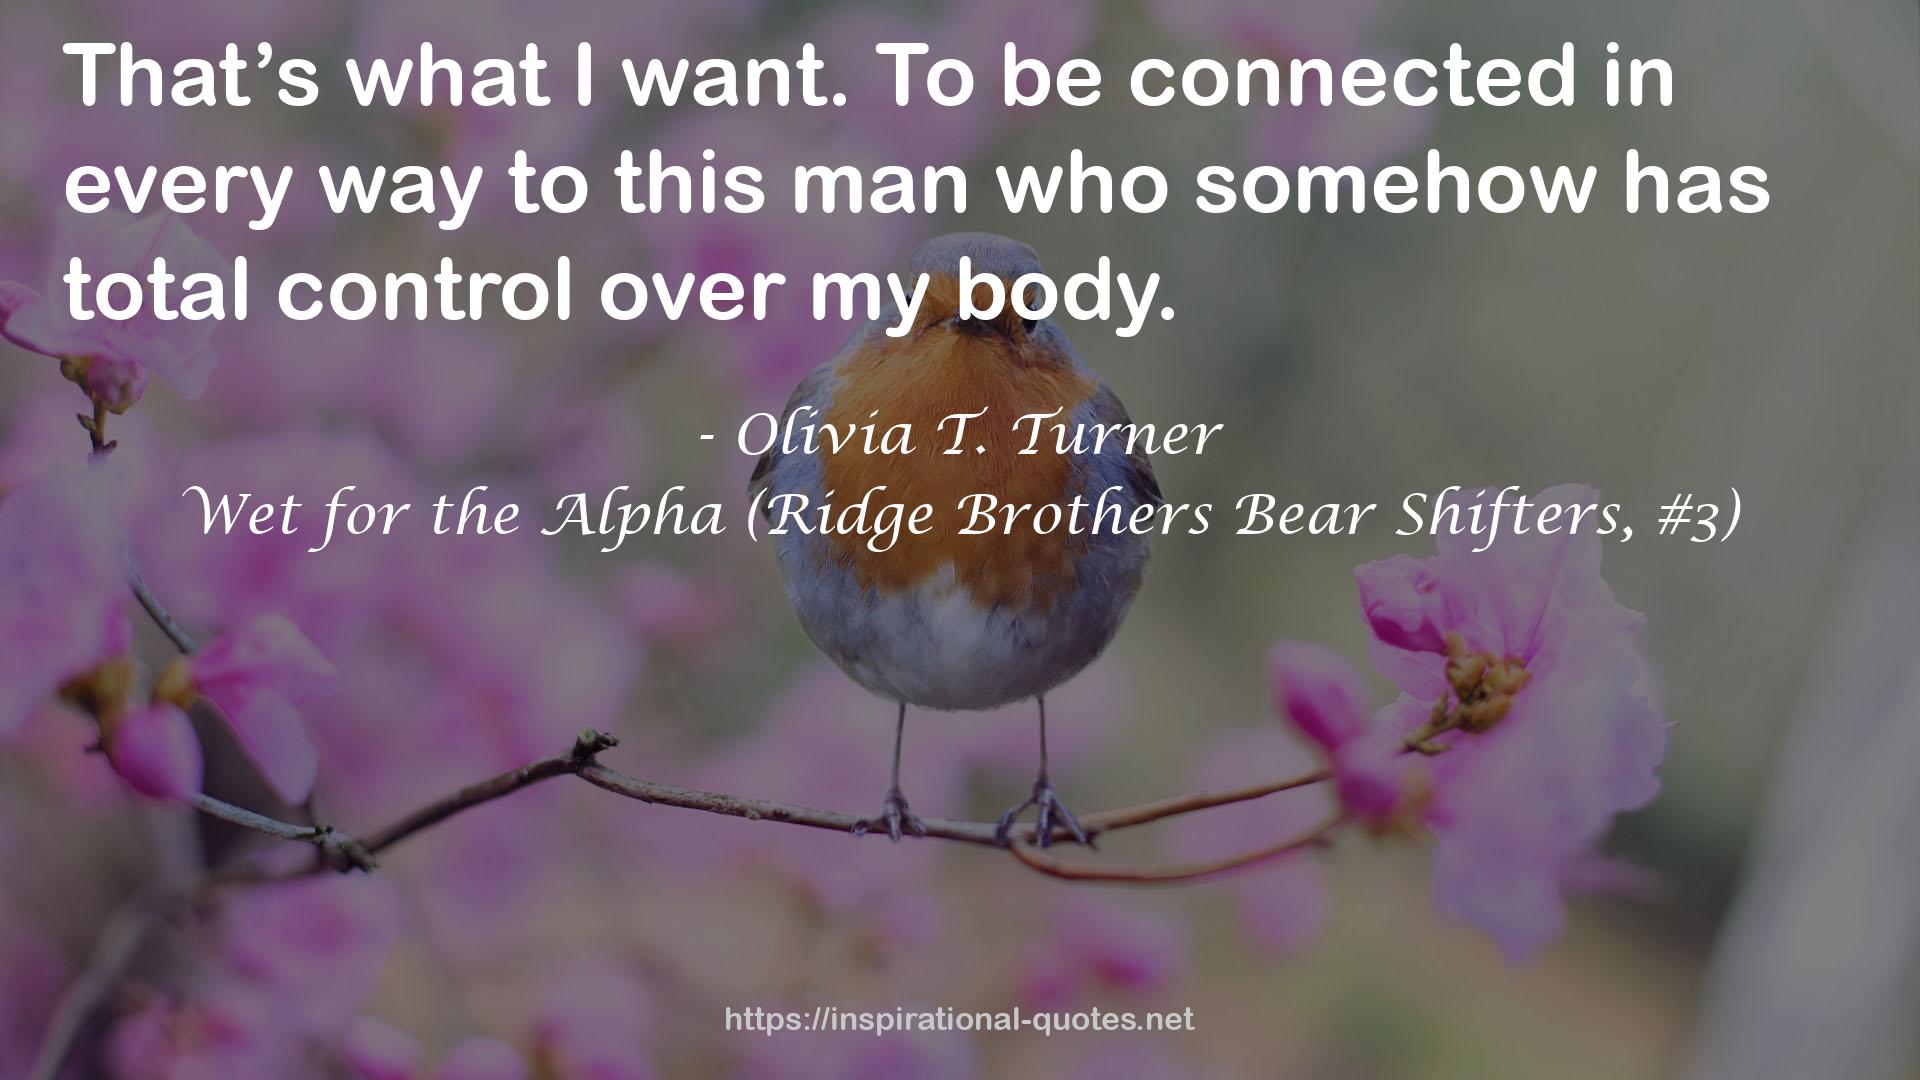 Wet for the Alpha (Ridge Brothers Bear Shifters, #3) QUOTES